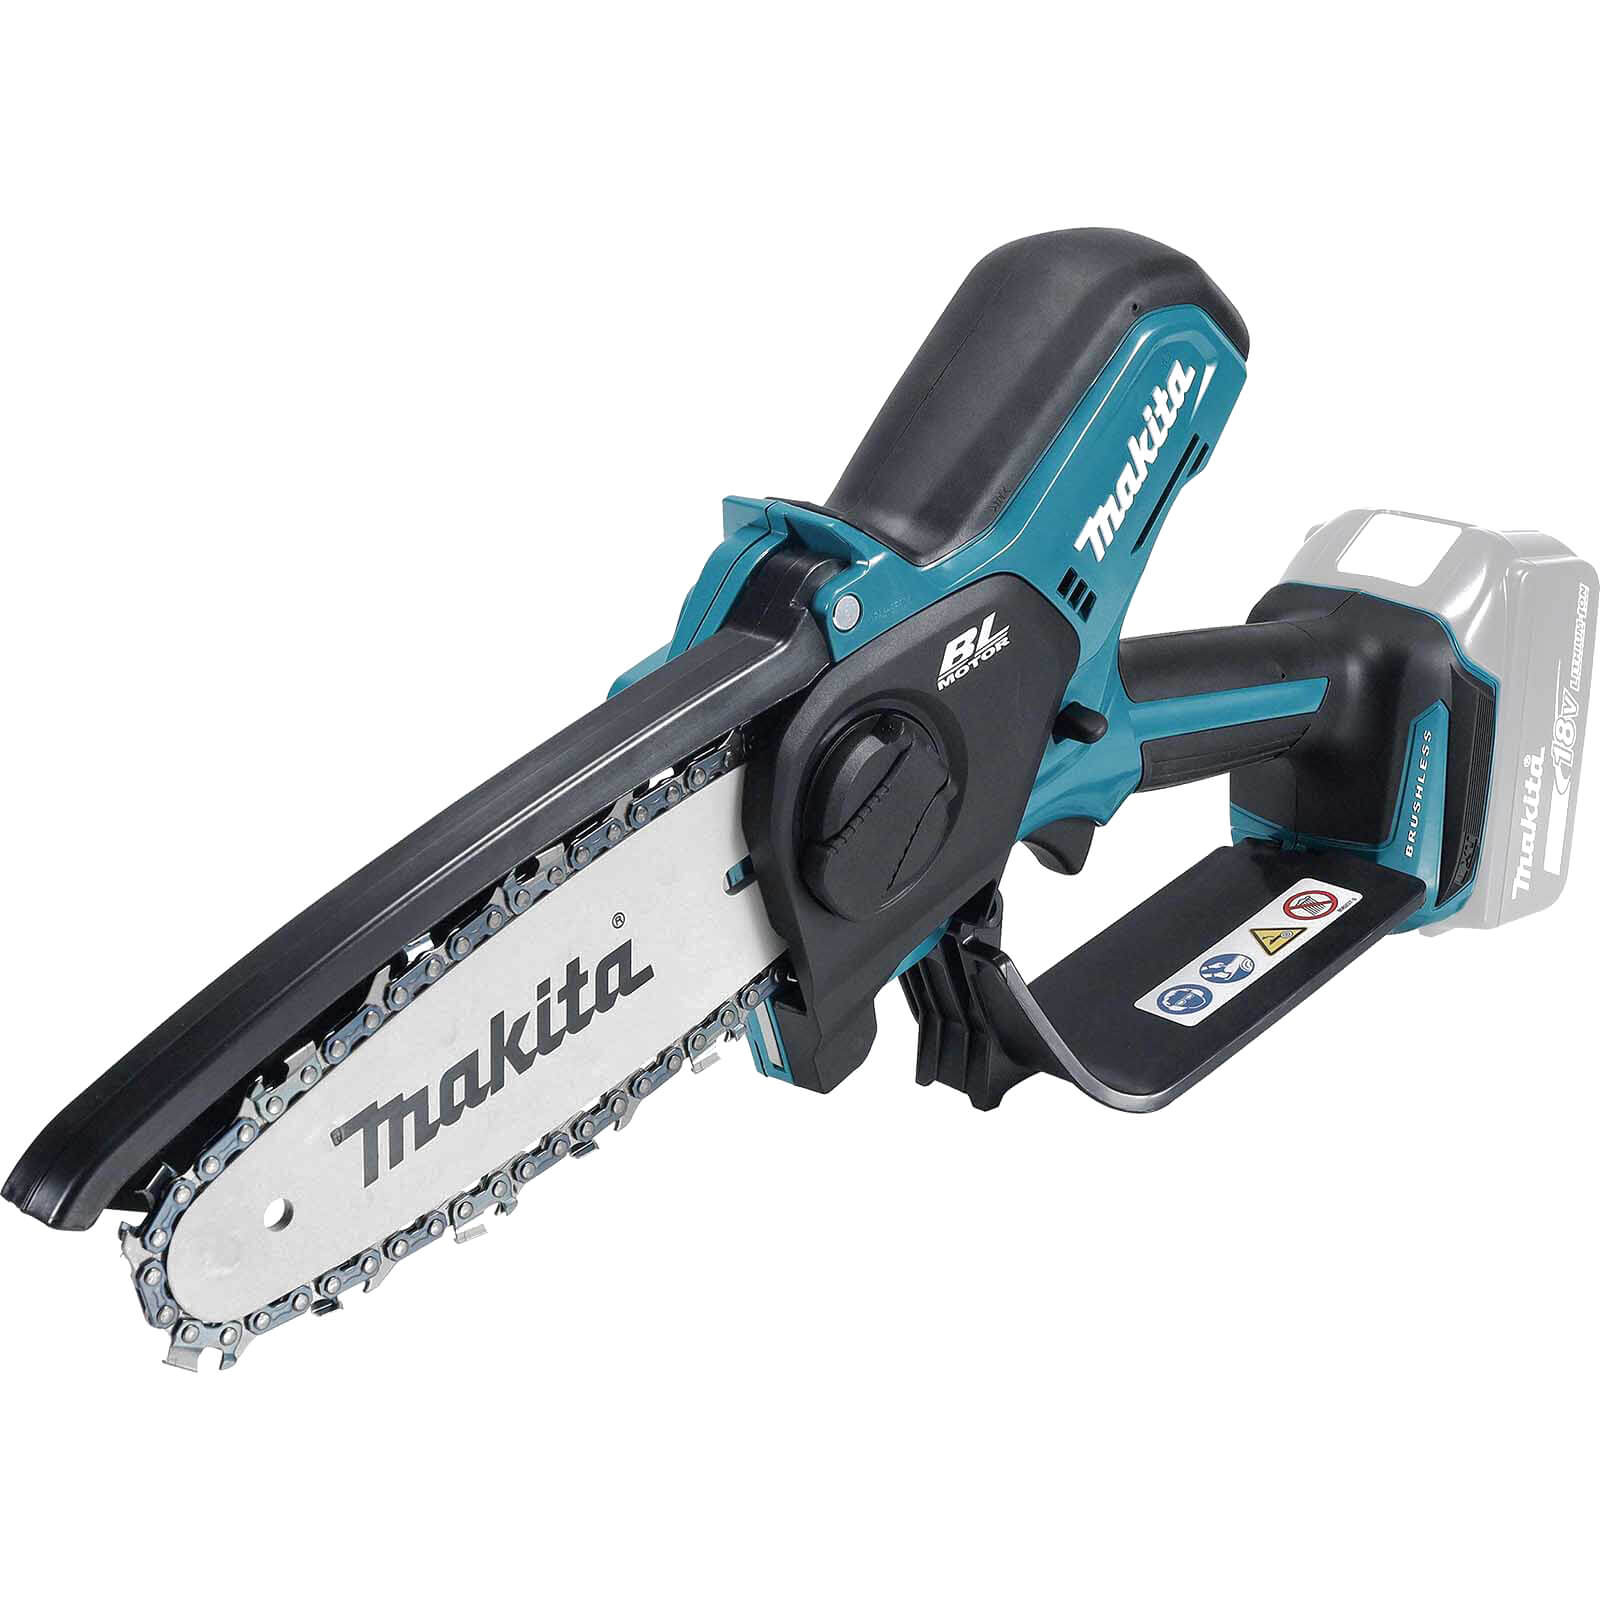 Makita DUC150 18v LXT Cordless Brushless Pruning Saw 150mm No Batteries No Charger